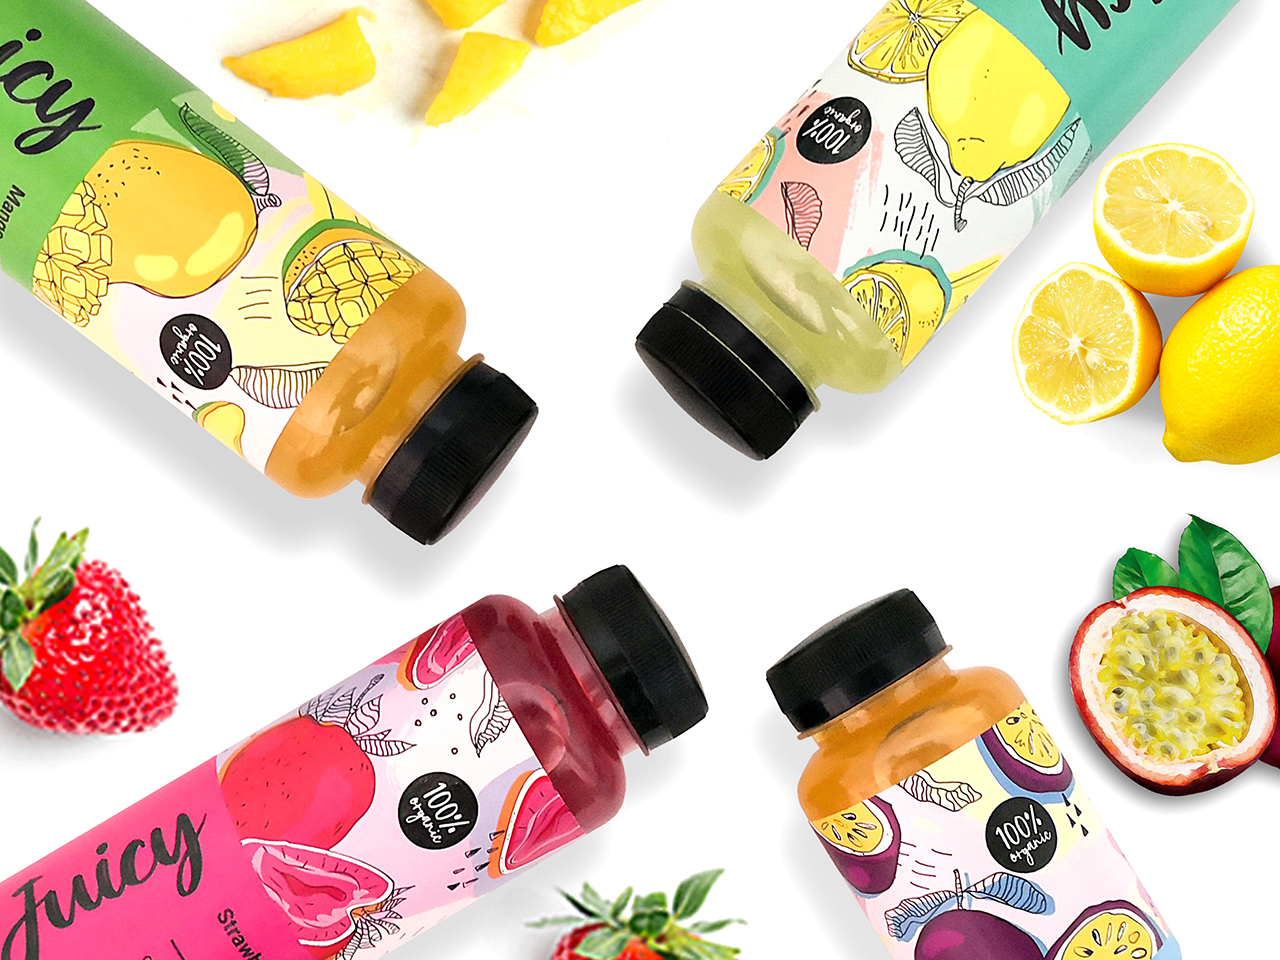 In-house Concept Juicy Brand a Handcrafted Organic Juice